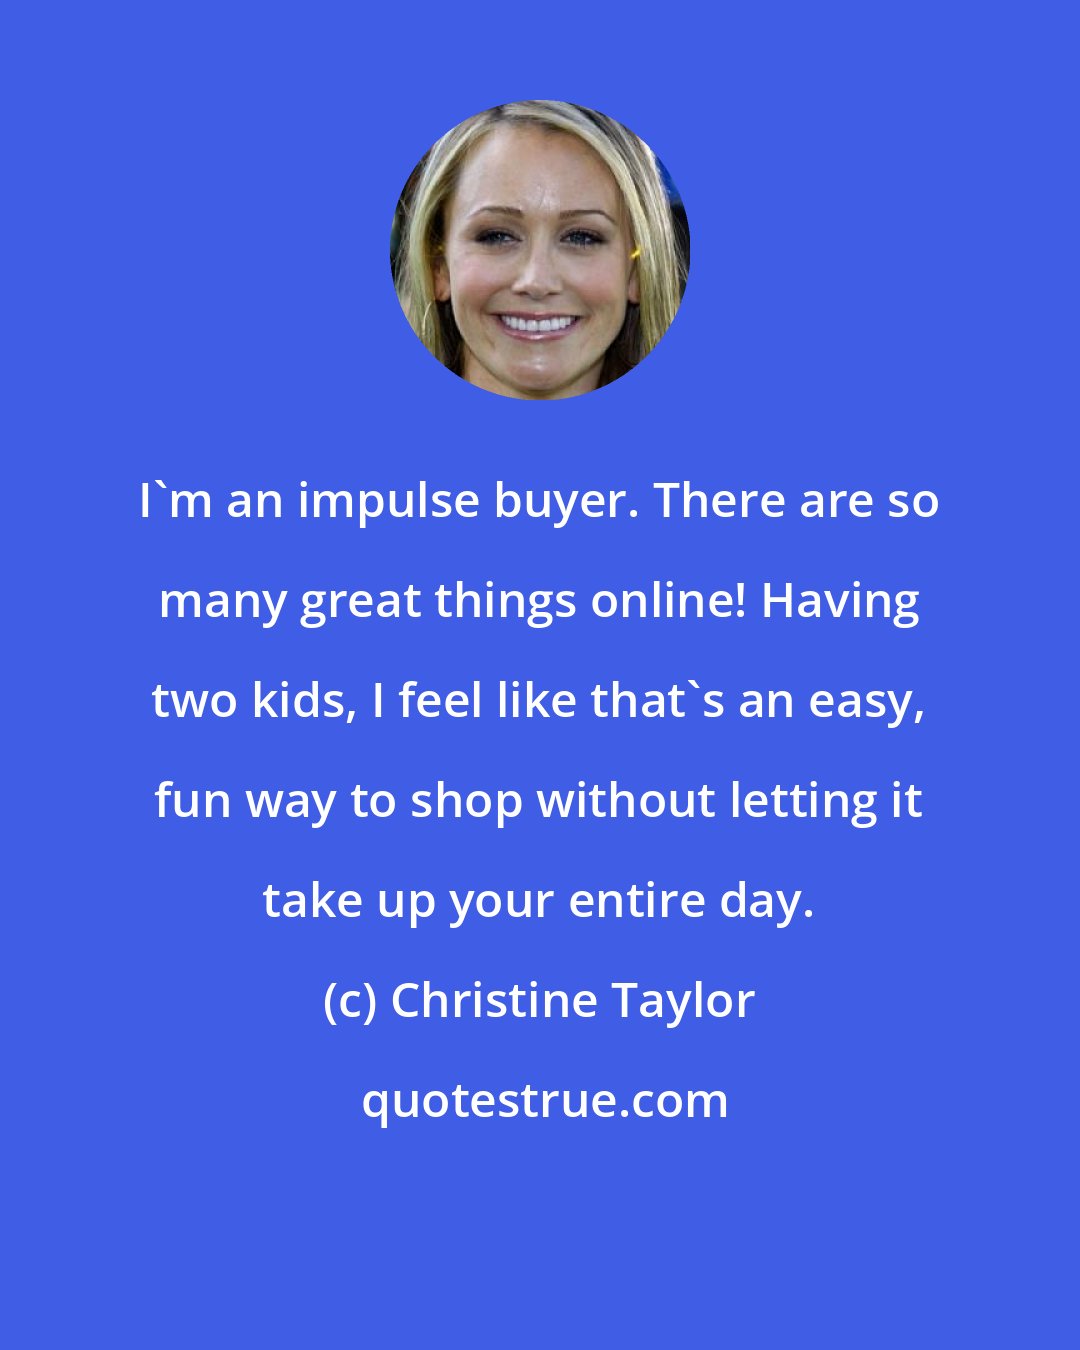 Christine Taylor: I'm an impulse buyer. There are so many great things online! Having two kids, I feel like that's an easy, fun way to shop without letting it take up your entire day.